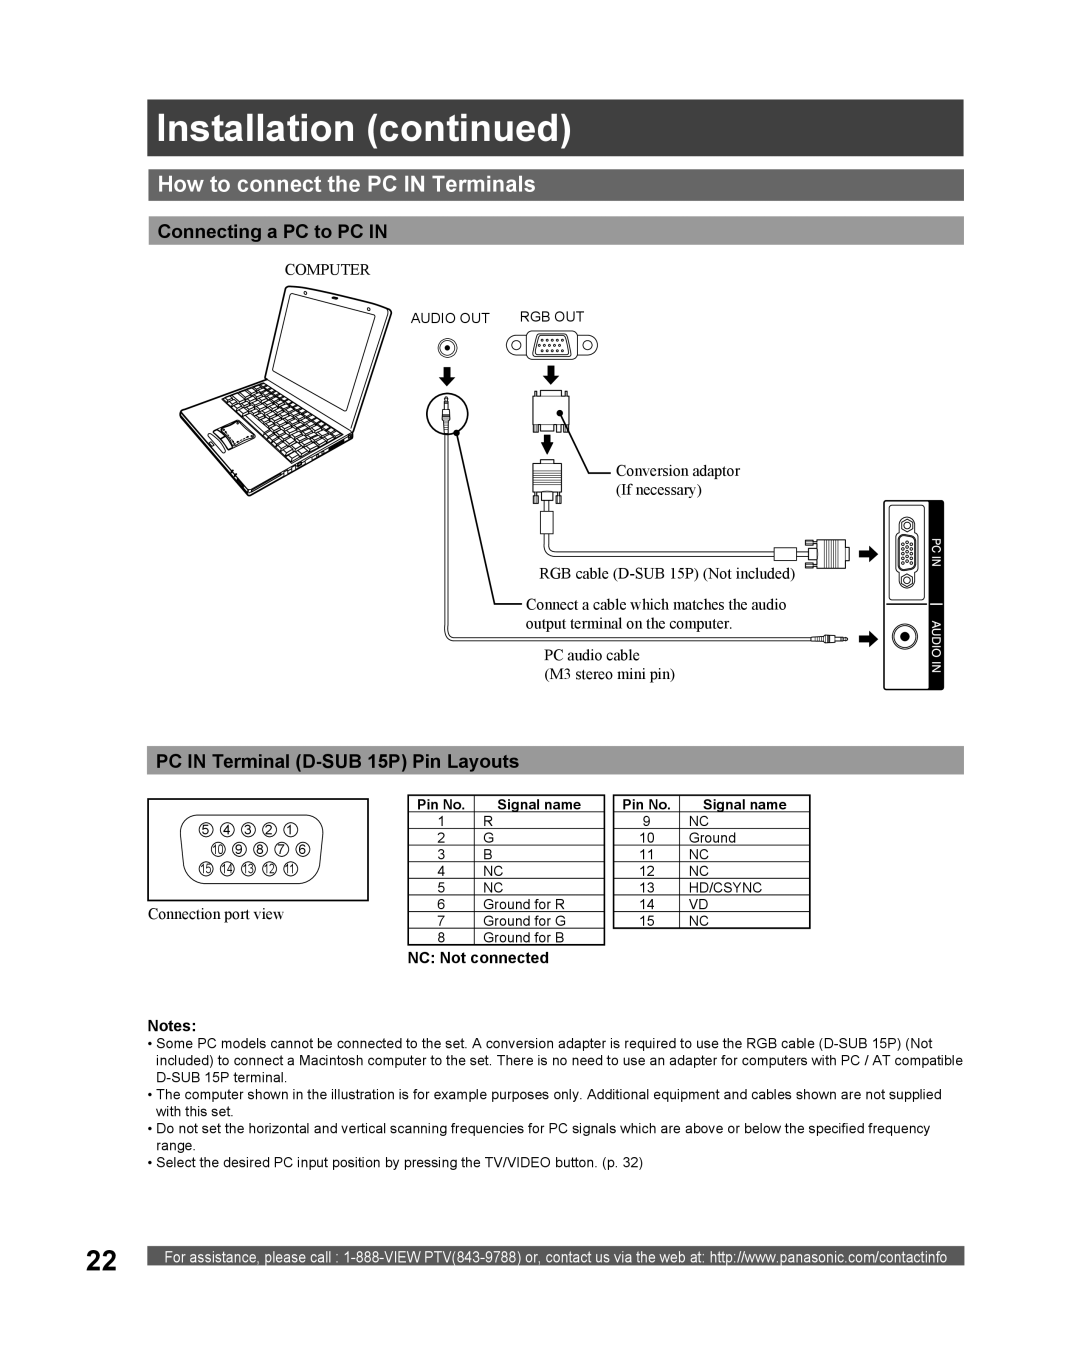 Panasonic PT 52LCX66 How to connect the PC IN Terminals, Connecting a PC to PC IN, PC IN Terminal D-SUB 15P Pin Layouts 